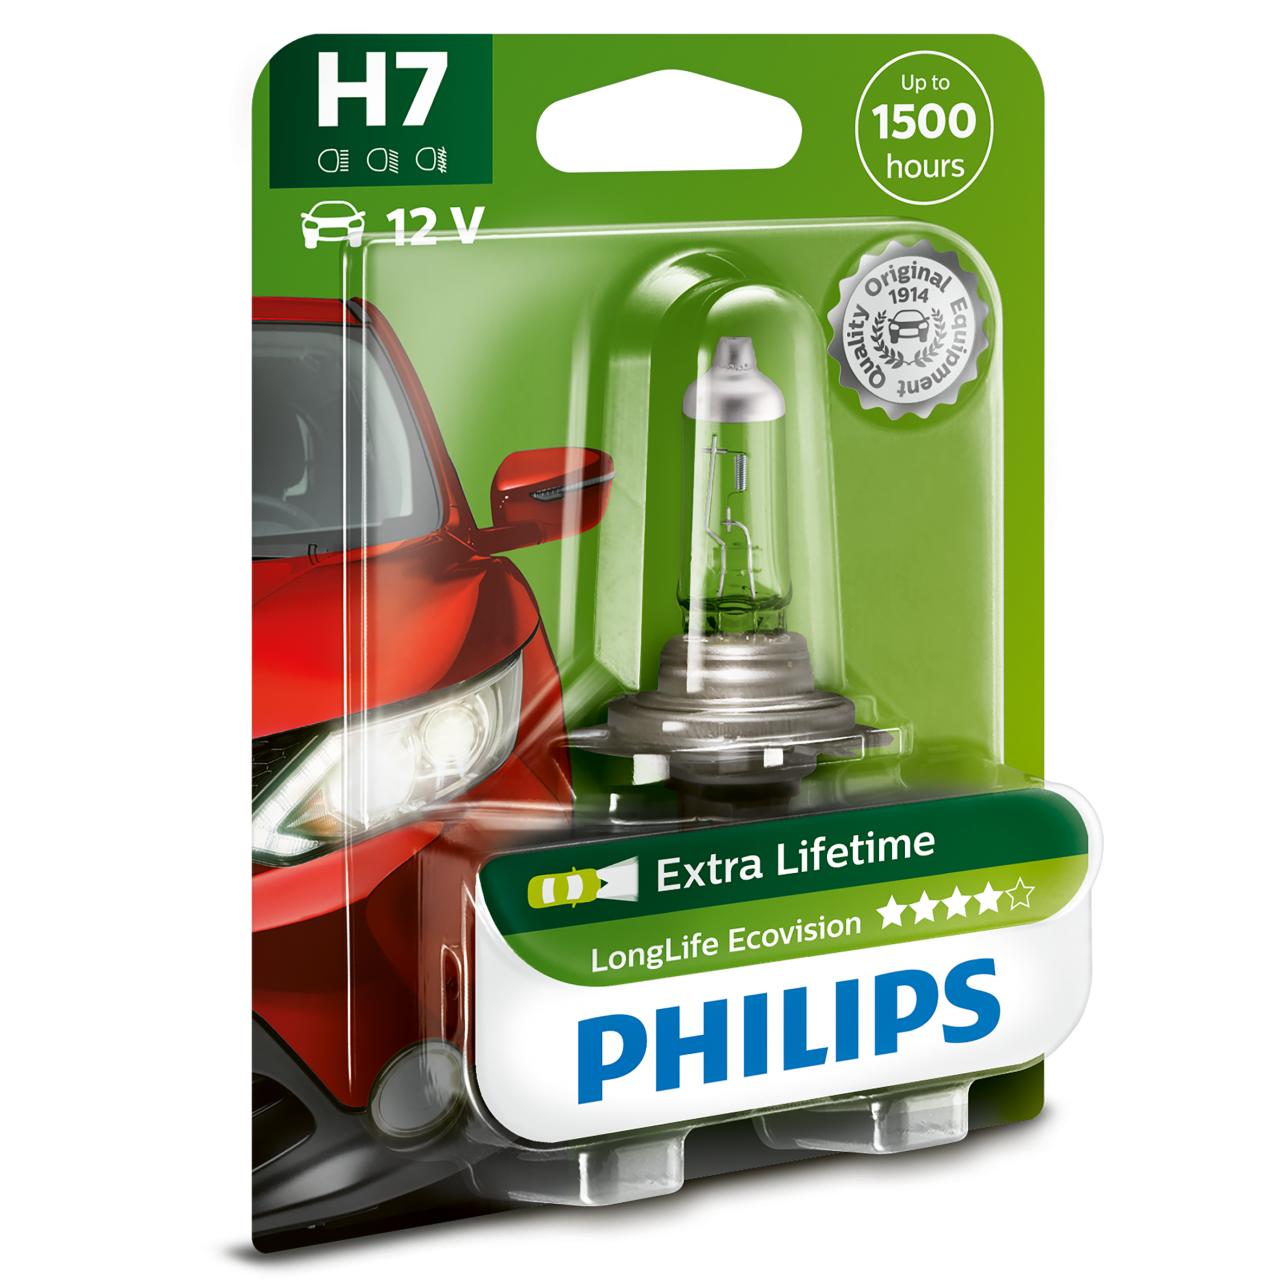 PHILIPS H7 AUTOLAMPE LONG LIFE ECO VISION 